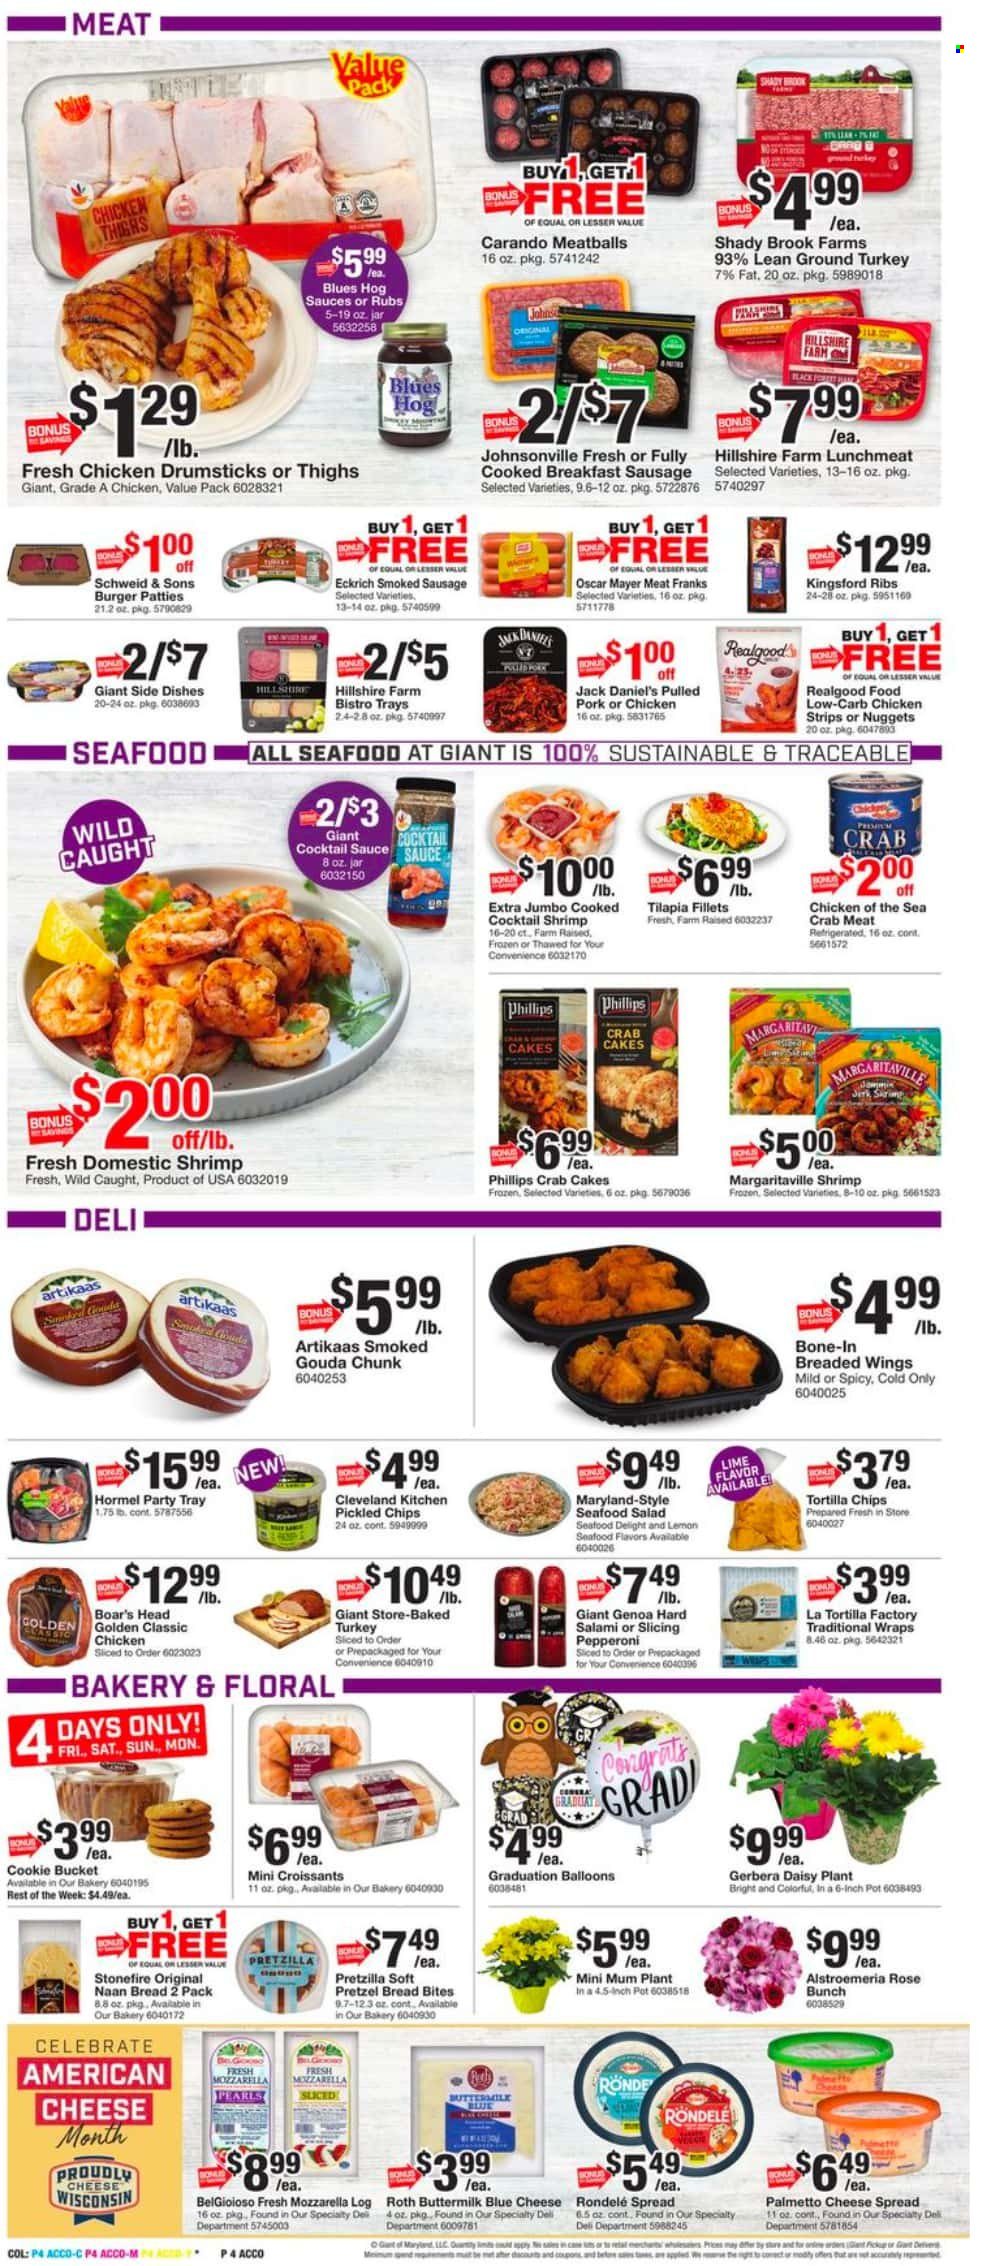 thumbnail - Giant Food Flyer - 05/26/2023 - 06/01/2023 - Sales products - bread, pretzels, croissant, wraps, salad, crab meat, tilapia, seafood, shrimps, crab cake, Jack Daniel's, meatballs, nuggets, hamburger, pulled pork, Hormel, Kingsford, Boar's Head, salami, Hillshire Farm, Johnsonville, Oscar Mayer, sausage, smoked sausage, pepperoni, frankfurters, cheese spread, seafood salad, lunch meat, american cheese, blue cheese, gouda, buttermilk, strips, chicken strips, tortilla chips, Chicken of the Sea, cocktail sauce, ground turkey, chicken thighs, chicken drumsticks, turkey, ribs, burger patties, Mum, pot, balloons, gerbera, rose, Alstroemeria. Page 6.